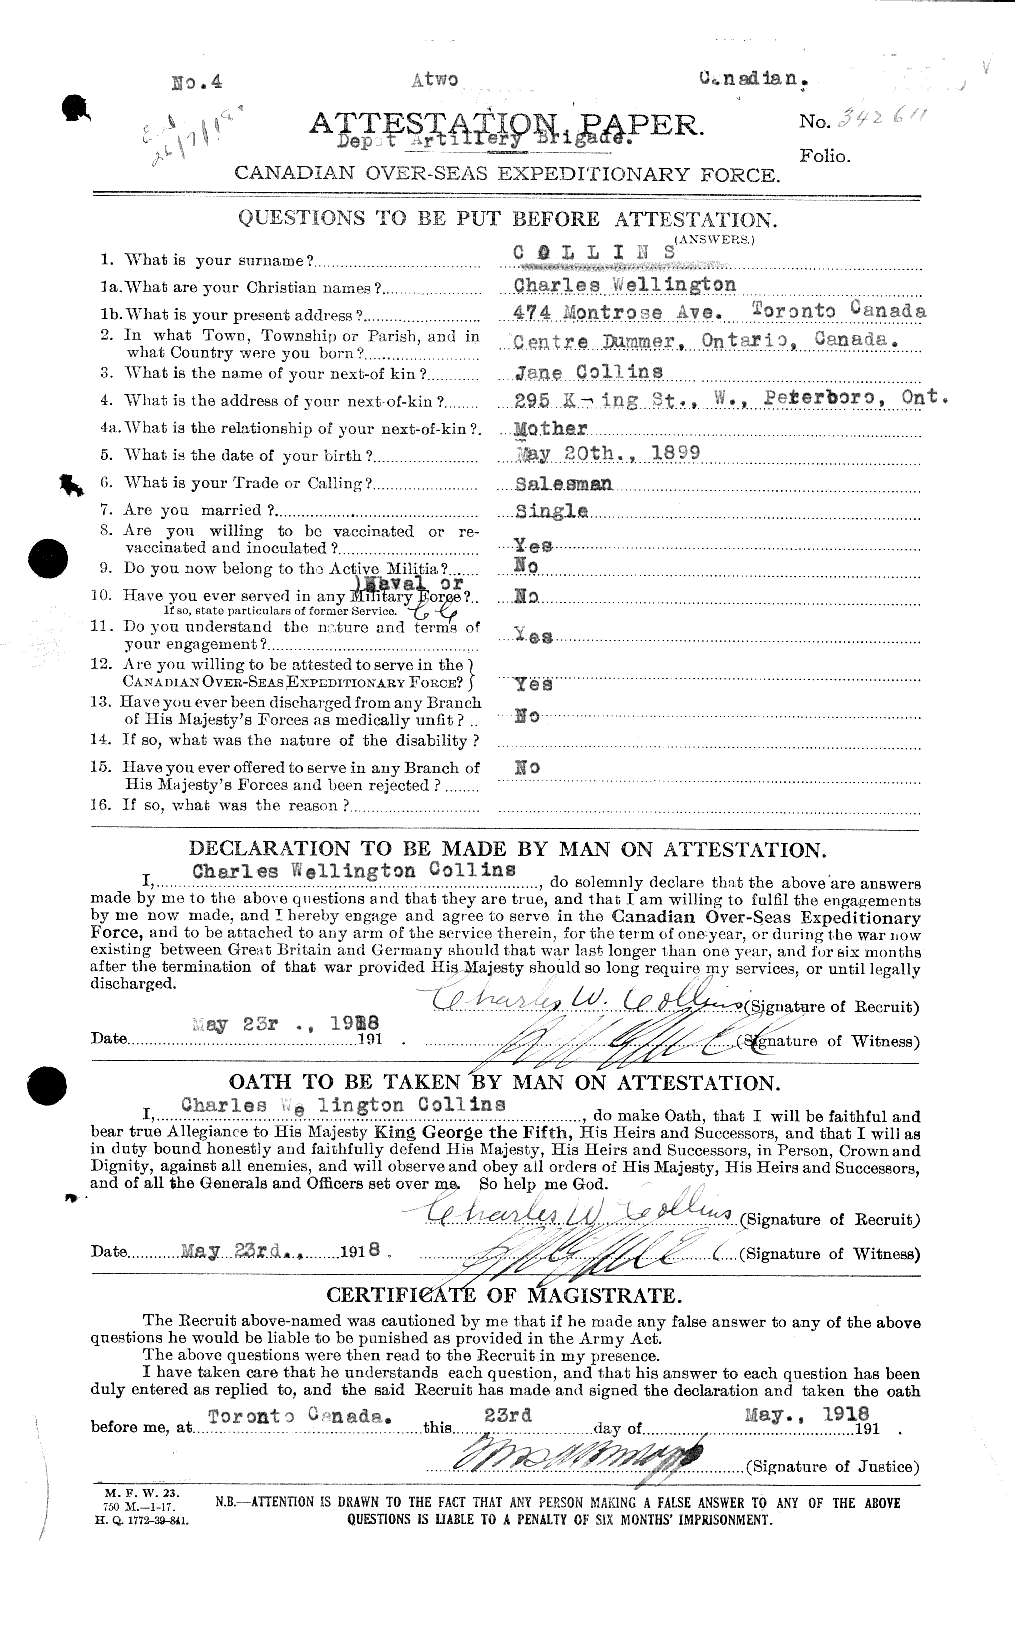 Personnel Records of the First World War - CEF 029043a